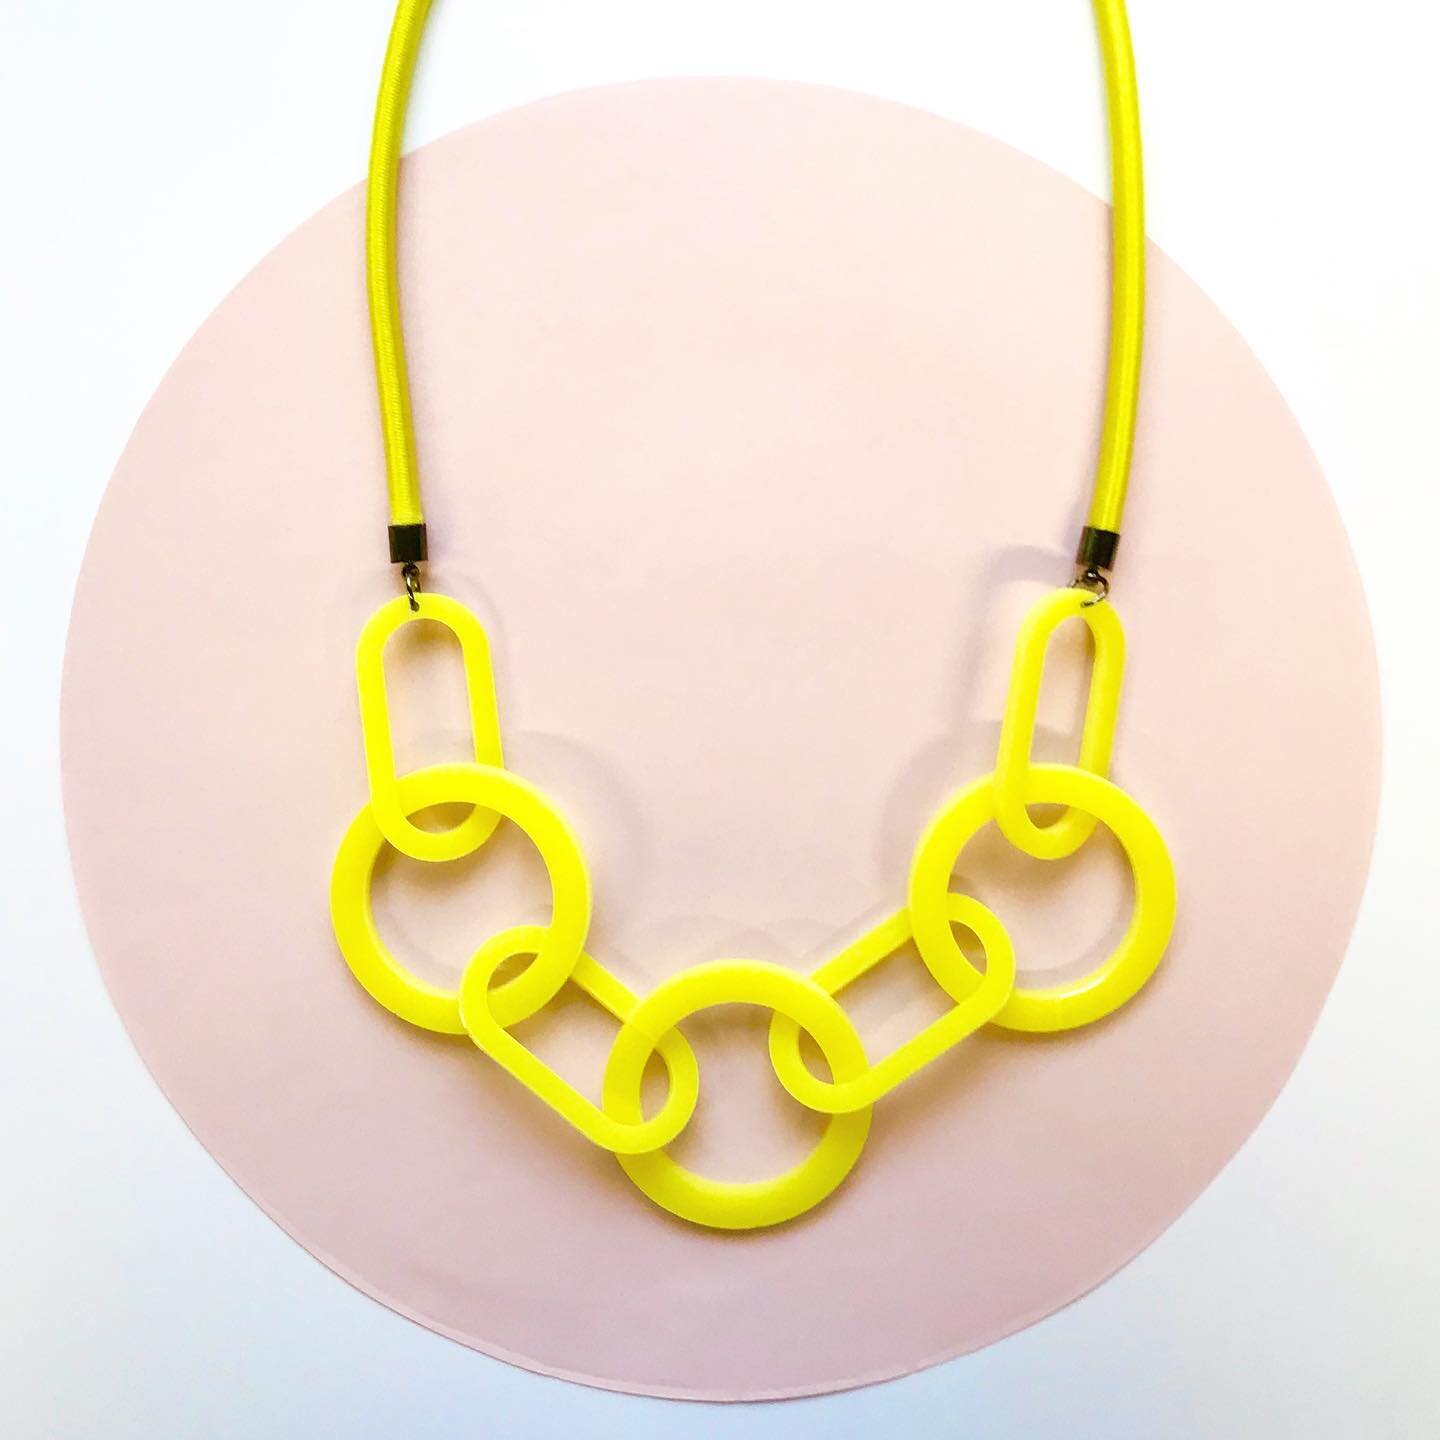 Well there goes week 1 of lockdown (again!) and so here&rsquo;s some sunshine yellow to brighten your feed. I haven&rsquo;t got this colour option up on the shop yet but do have a couple in stock so if you fancy one to add a pop of colour and happine